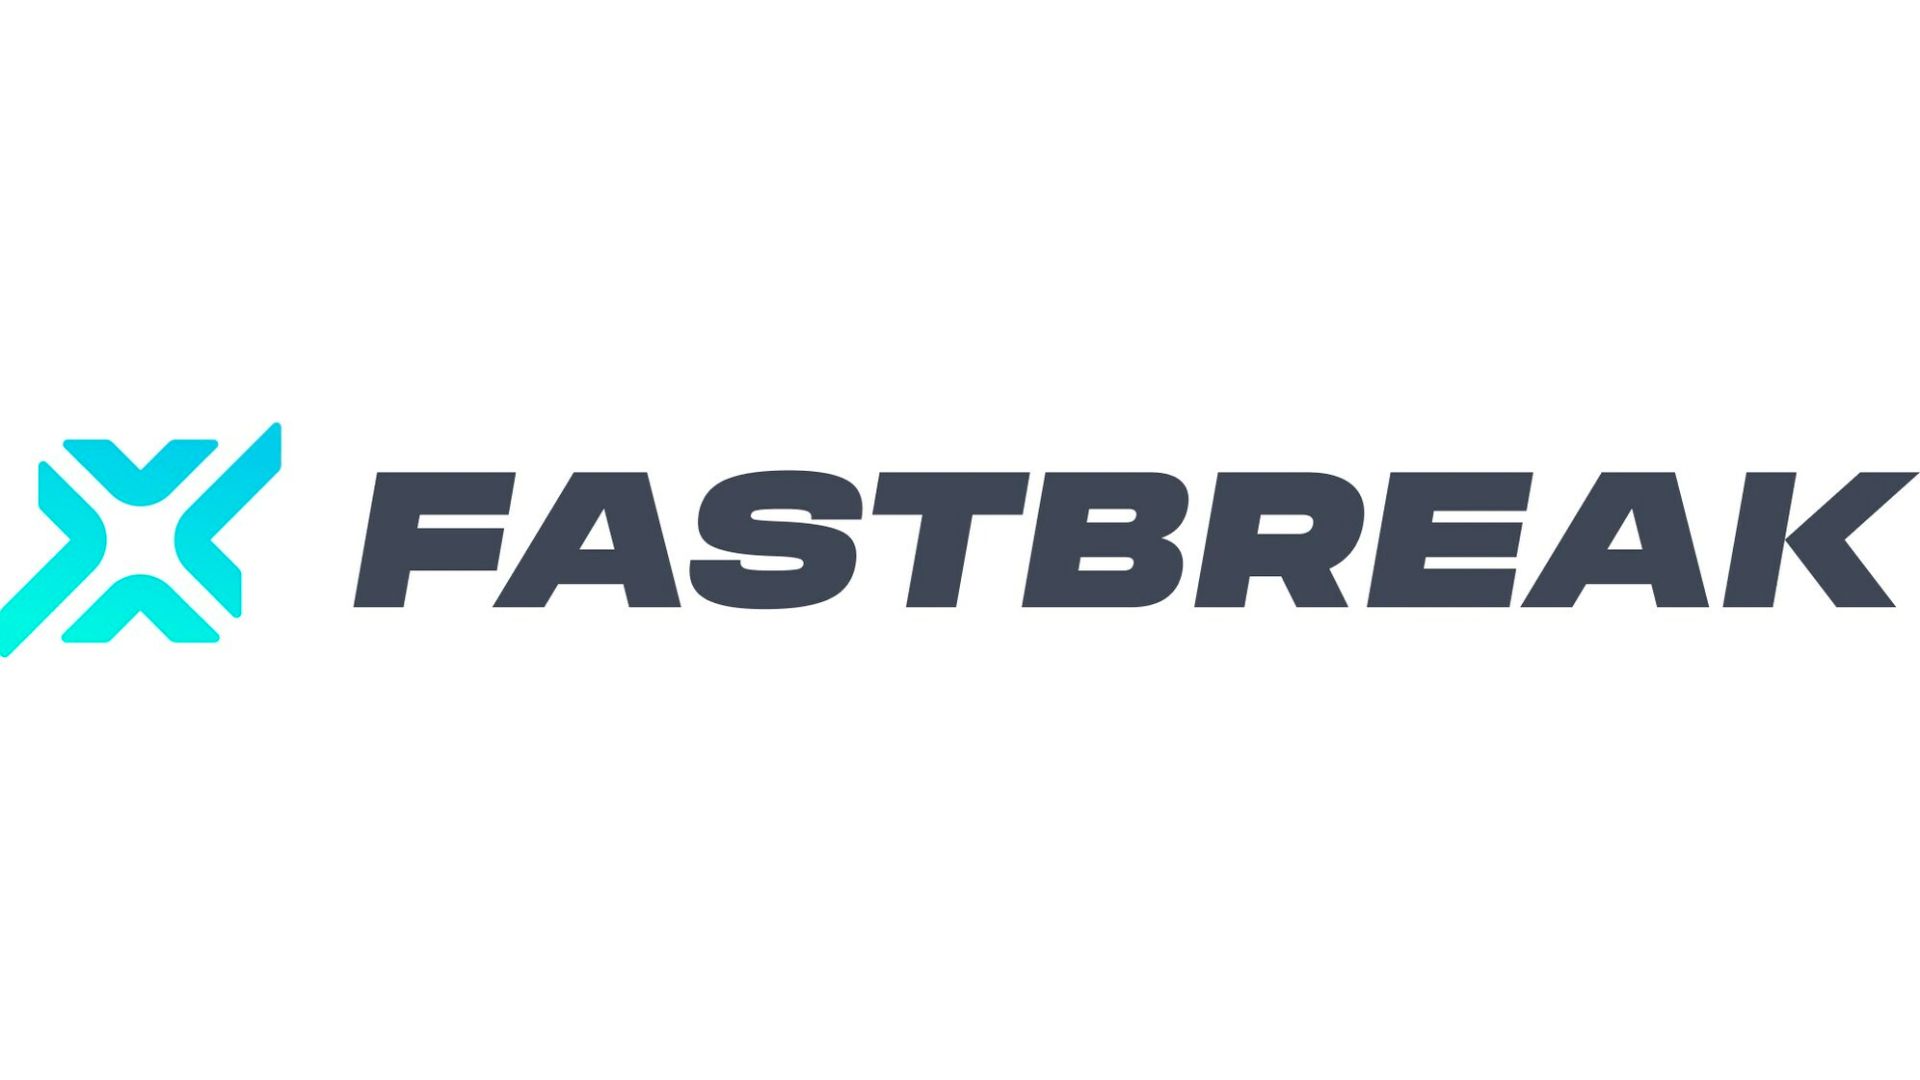 NBA Enters Long-Term Agreement with Fastbreak.ai for Their Scheduling Platform Usage